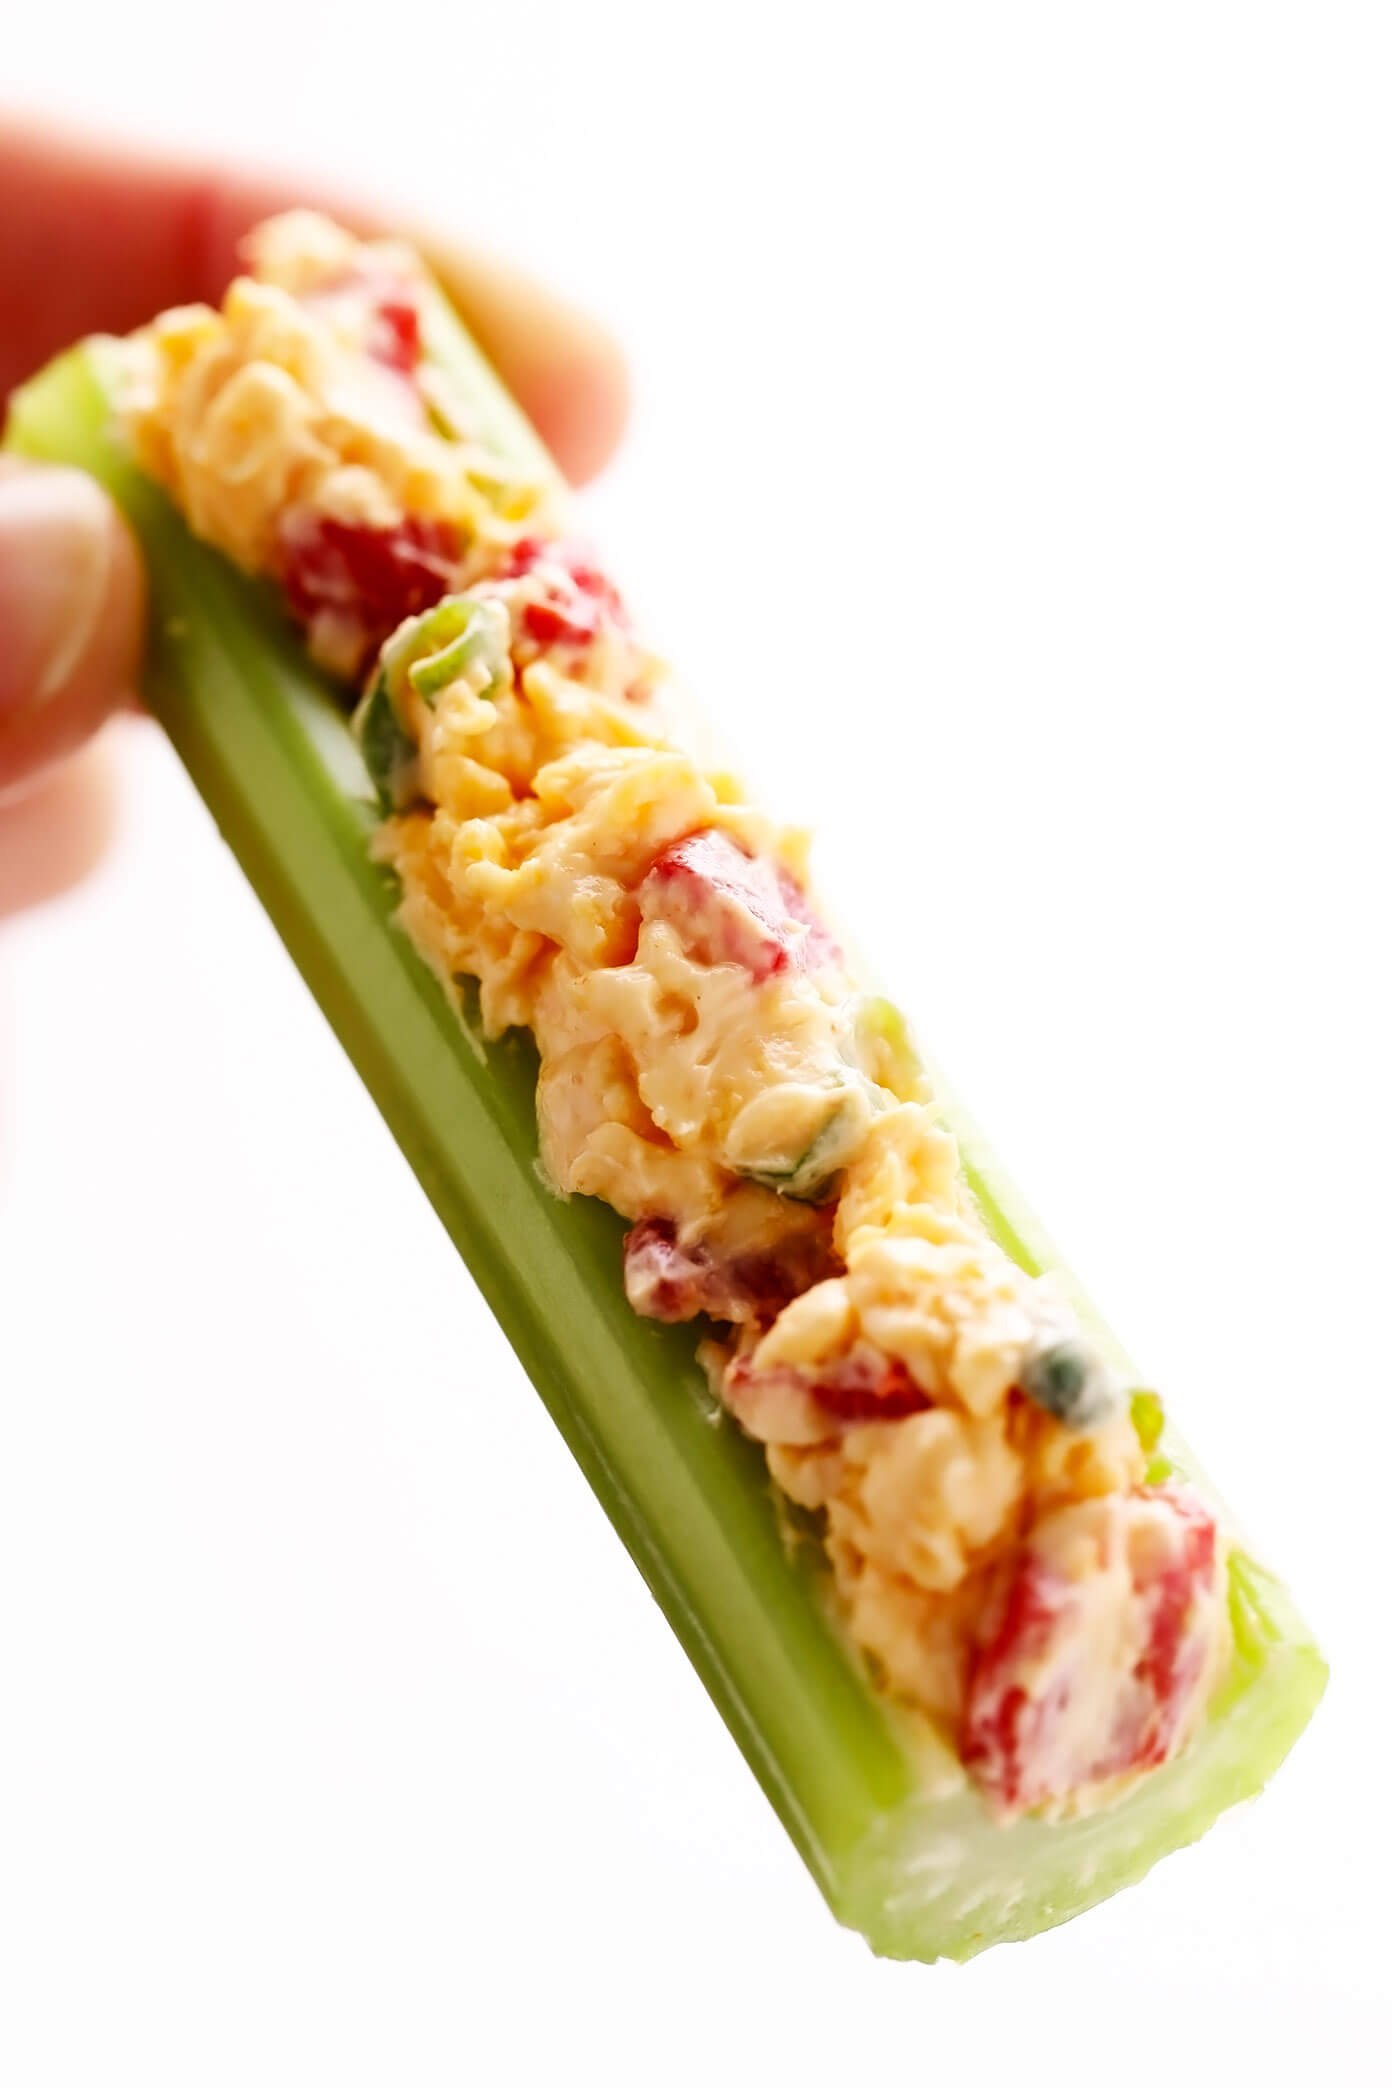 Celery Stick with Pimento Cheese